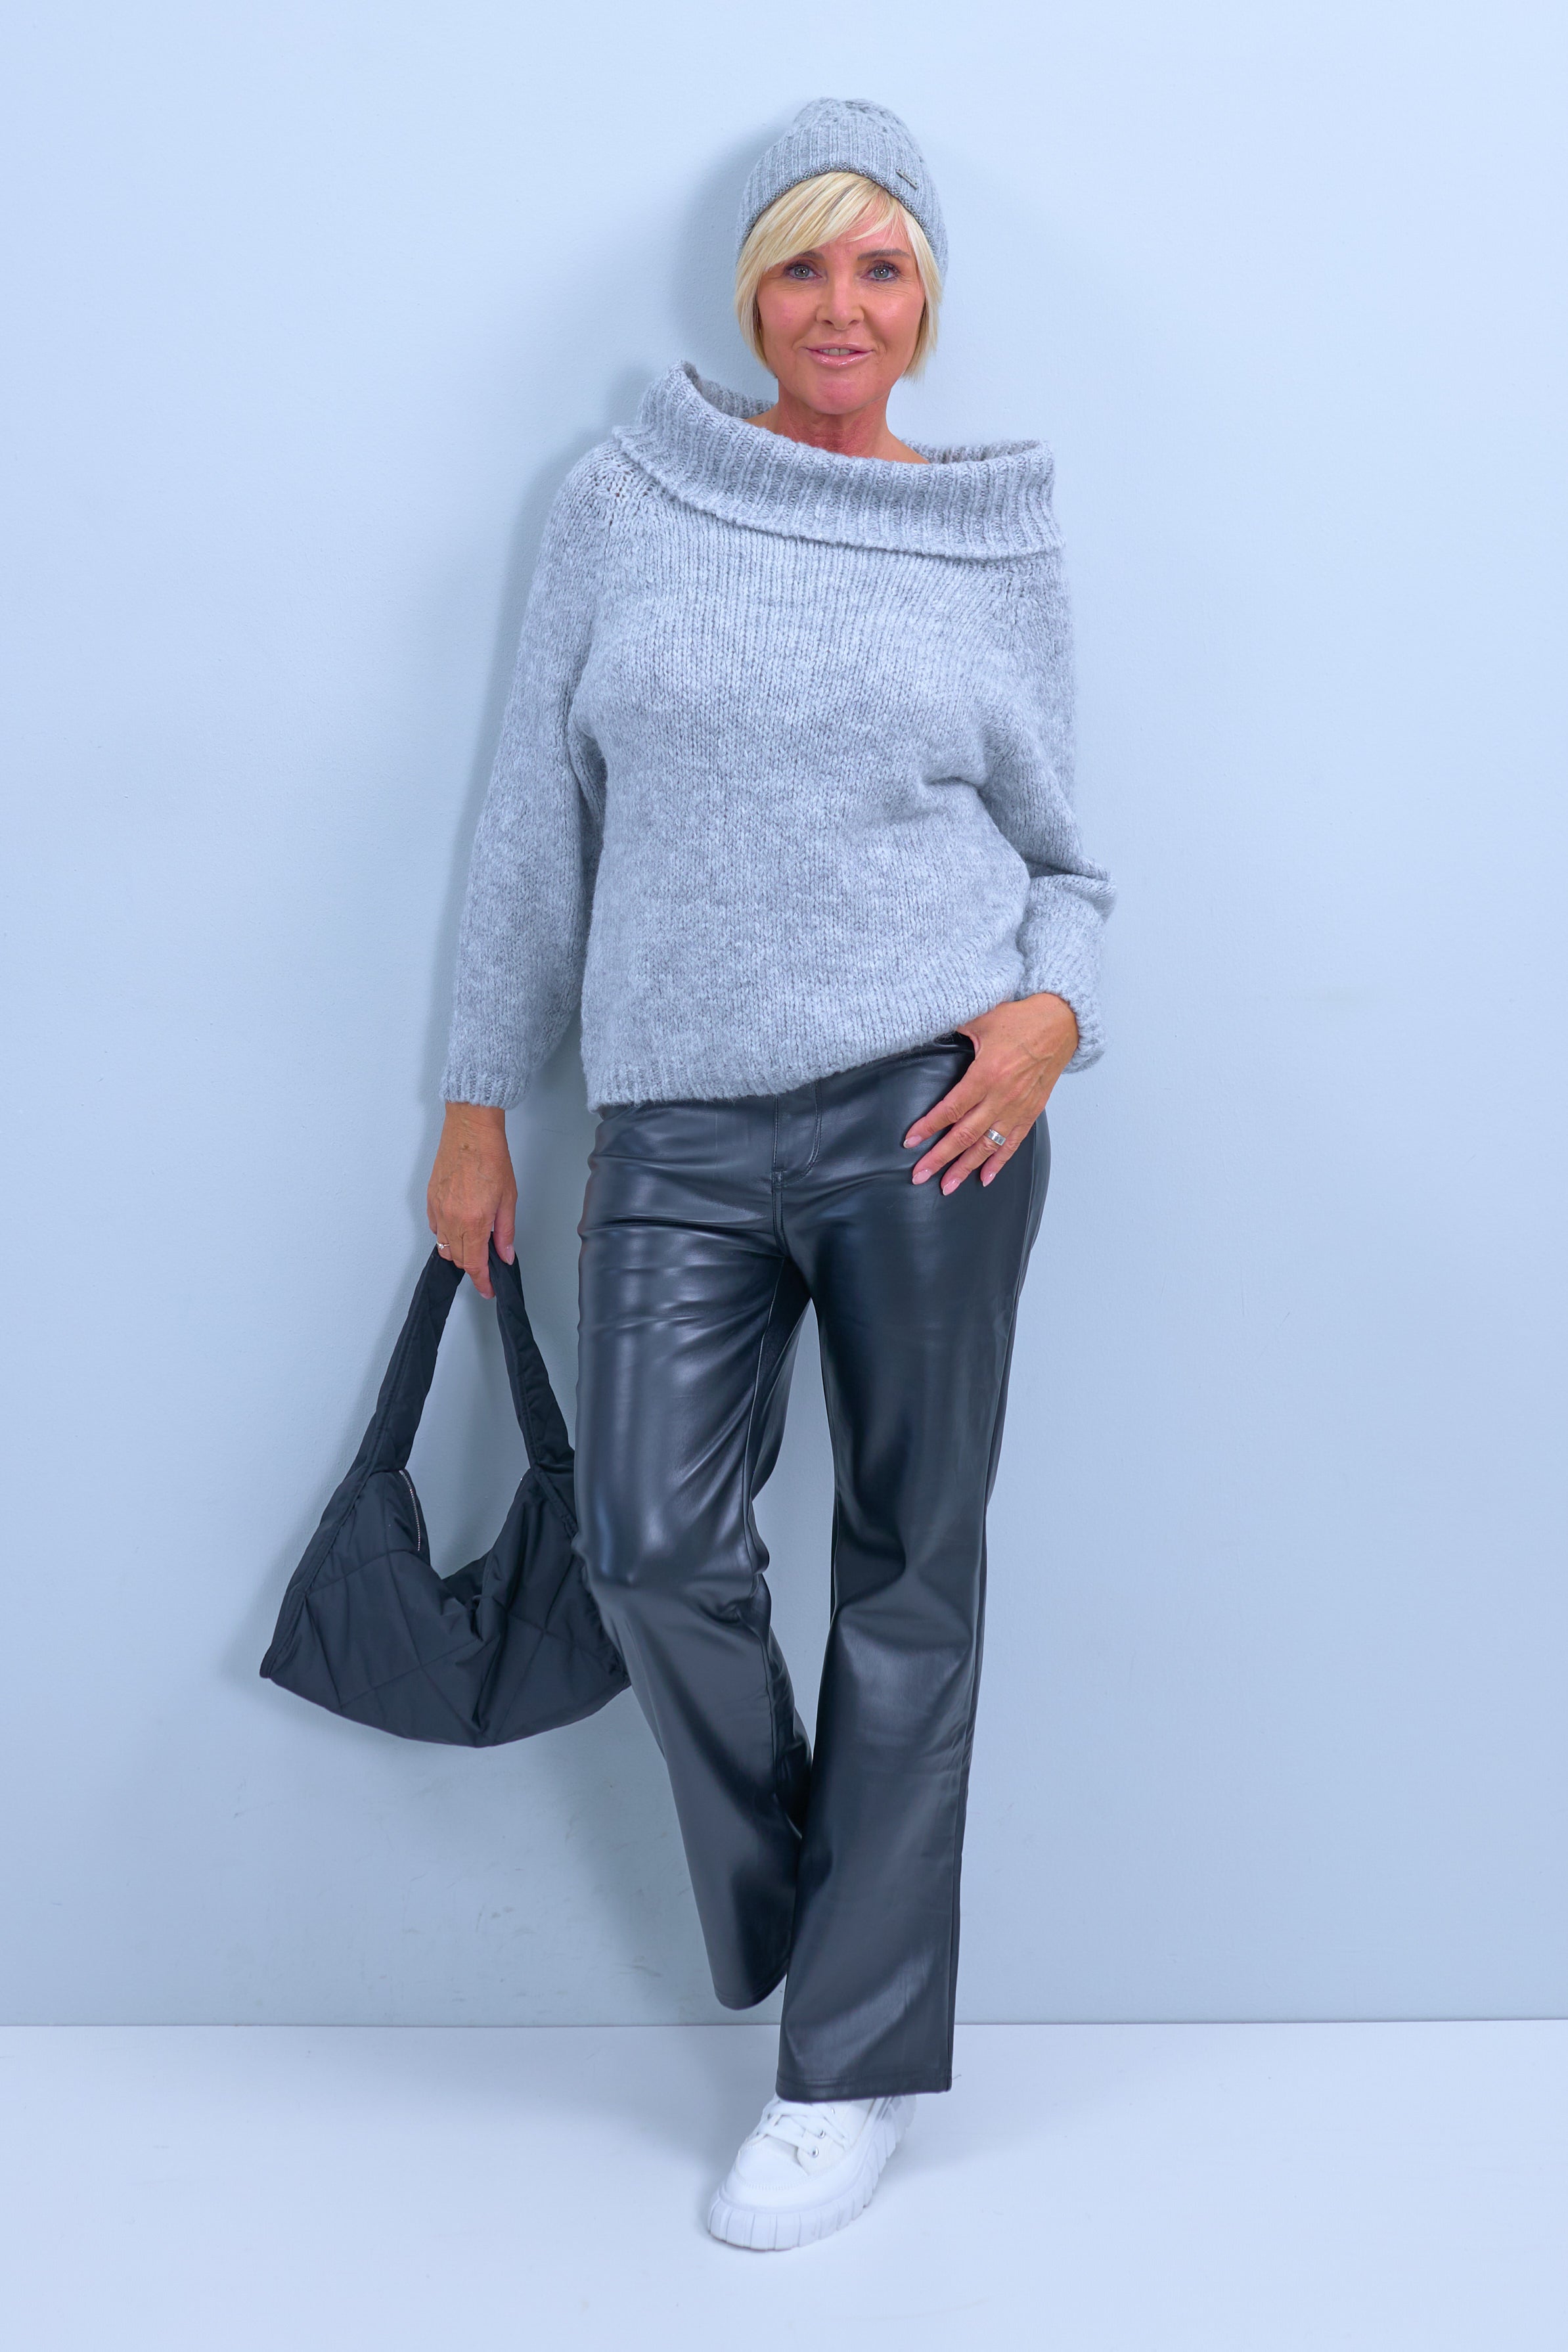 Knitted sweater with a wide turtleneck, grey